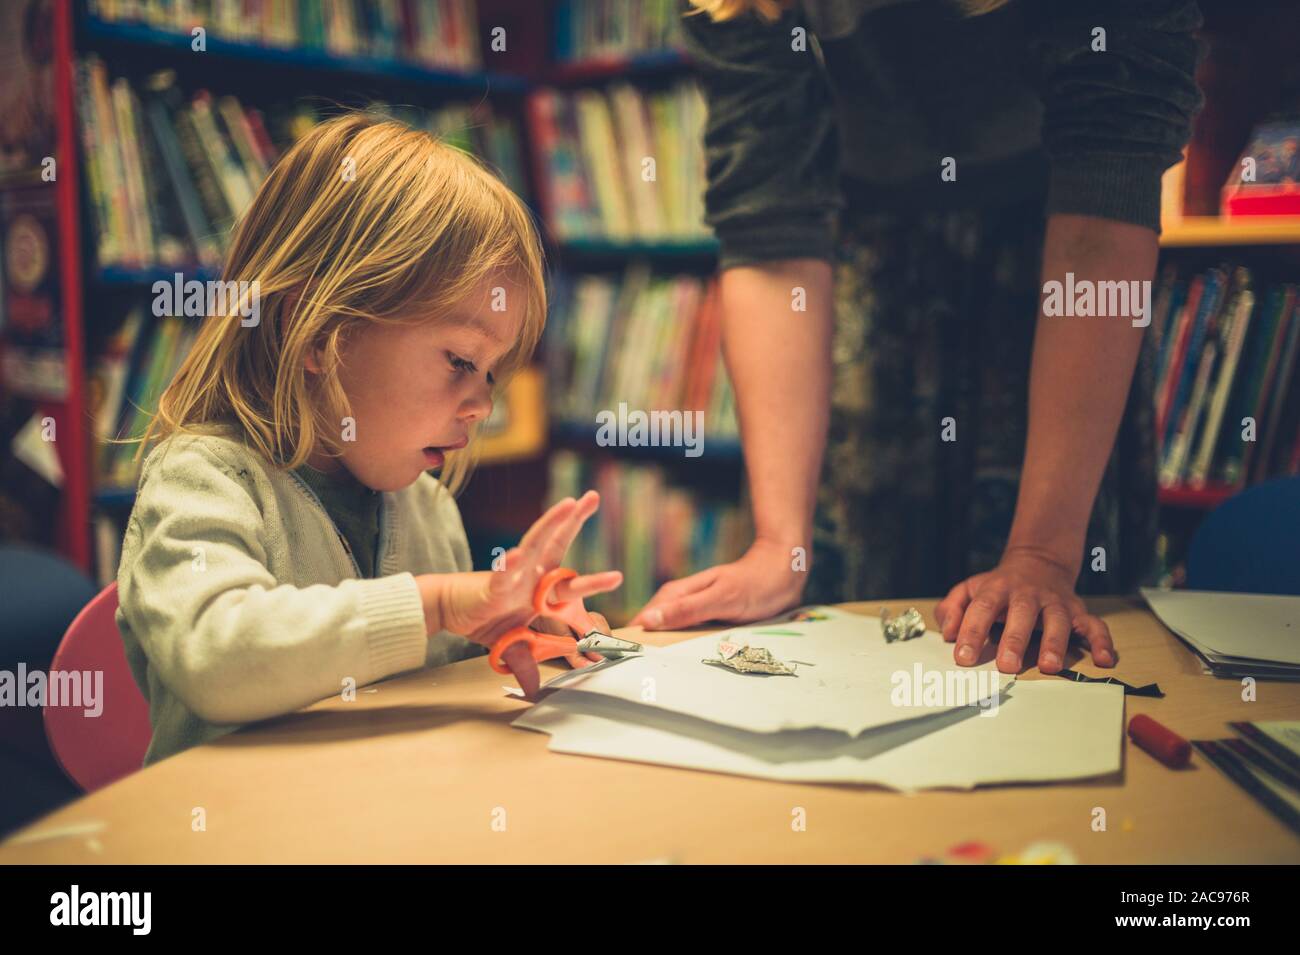 A teacher is supervising a little toddler using scissors at school Stock Photo